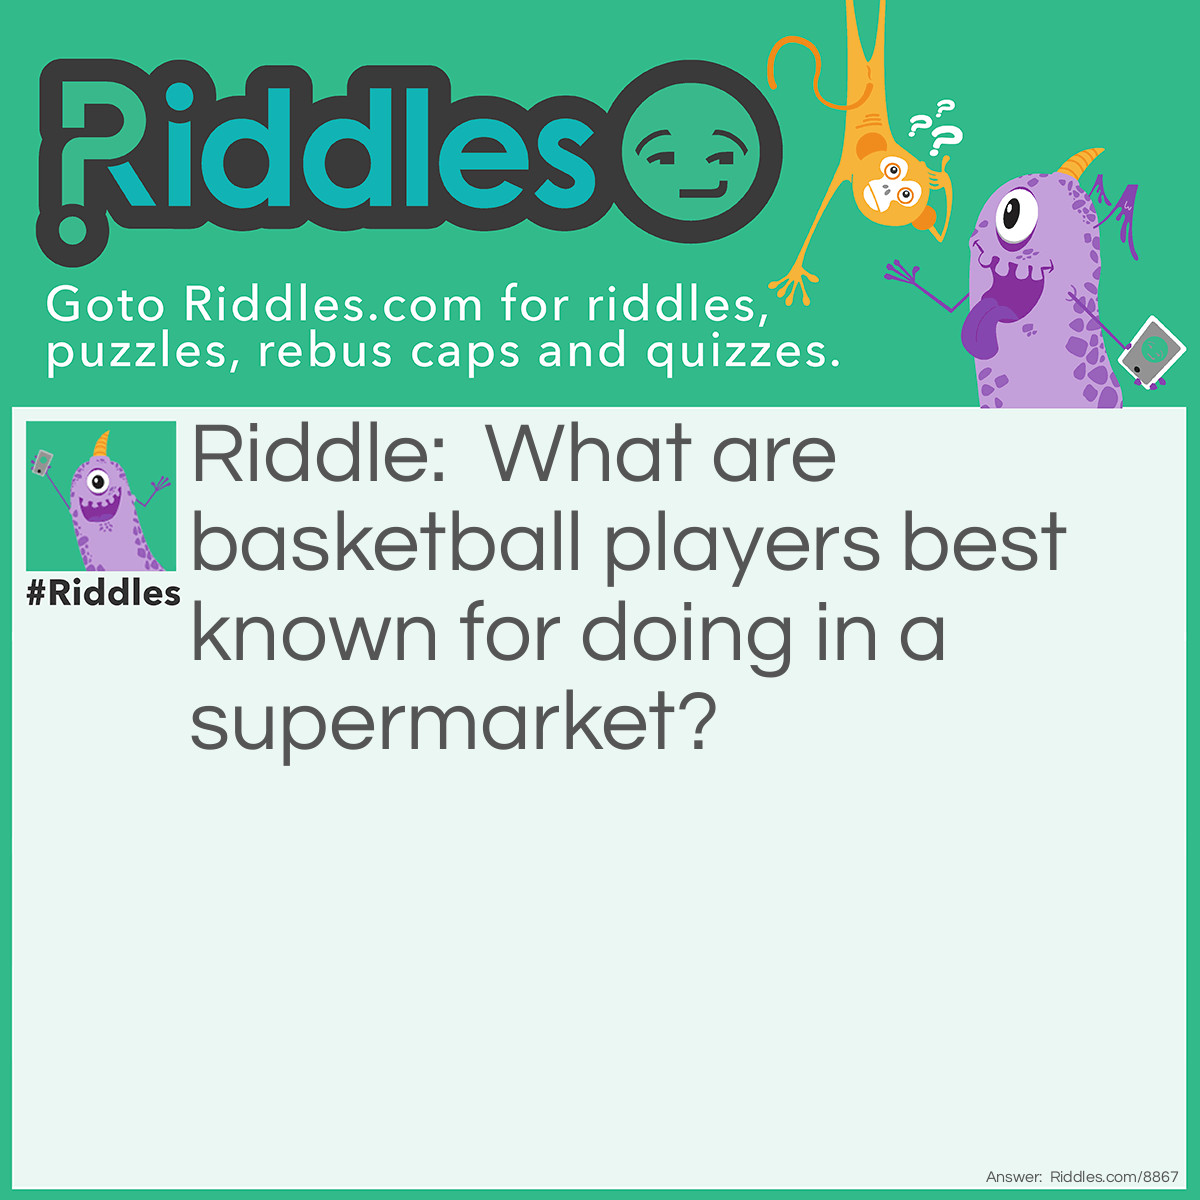 Riddle: What are basketball players best known for doing in a supermarket? Answer: They dribble towards the can of spaghetti hoops before slam-dunking it into the basket!